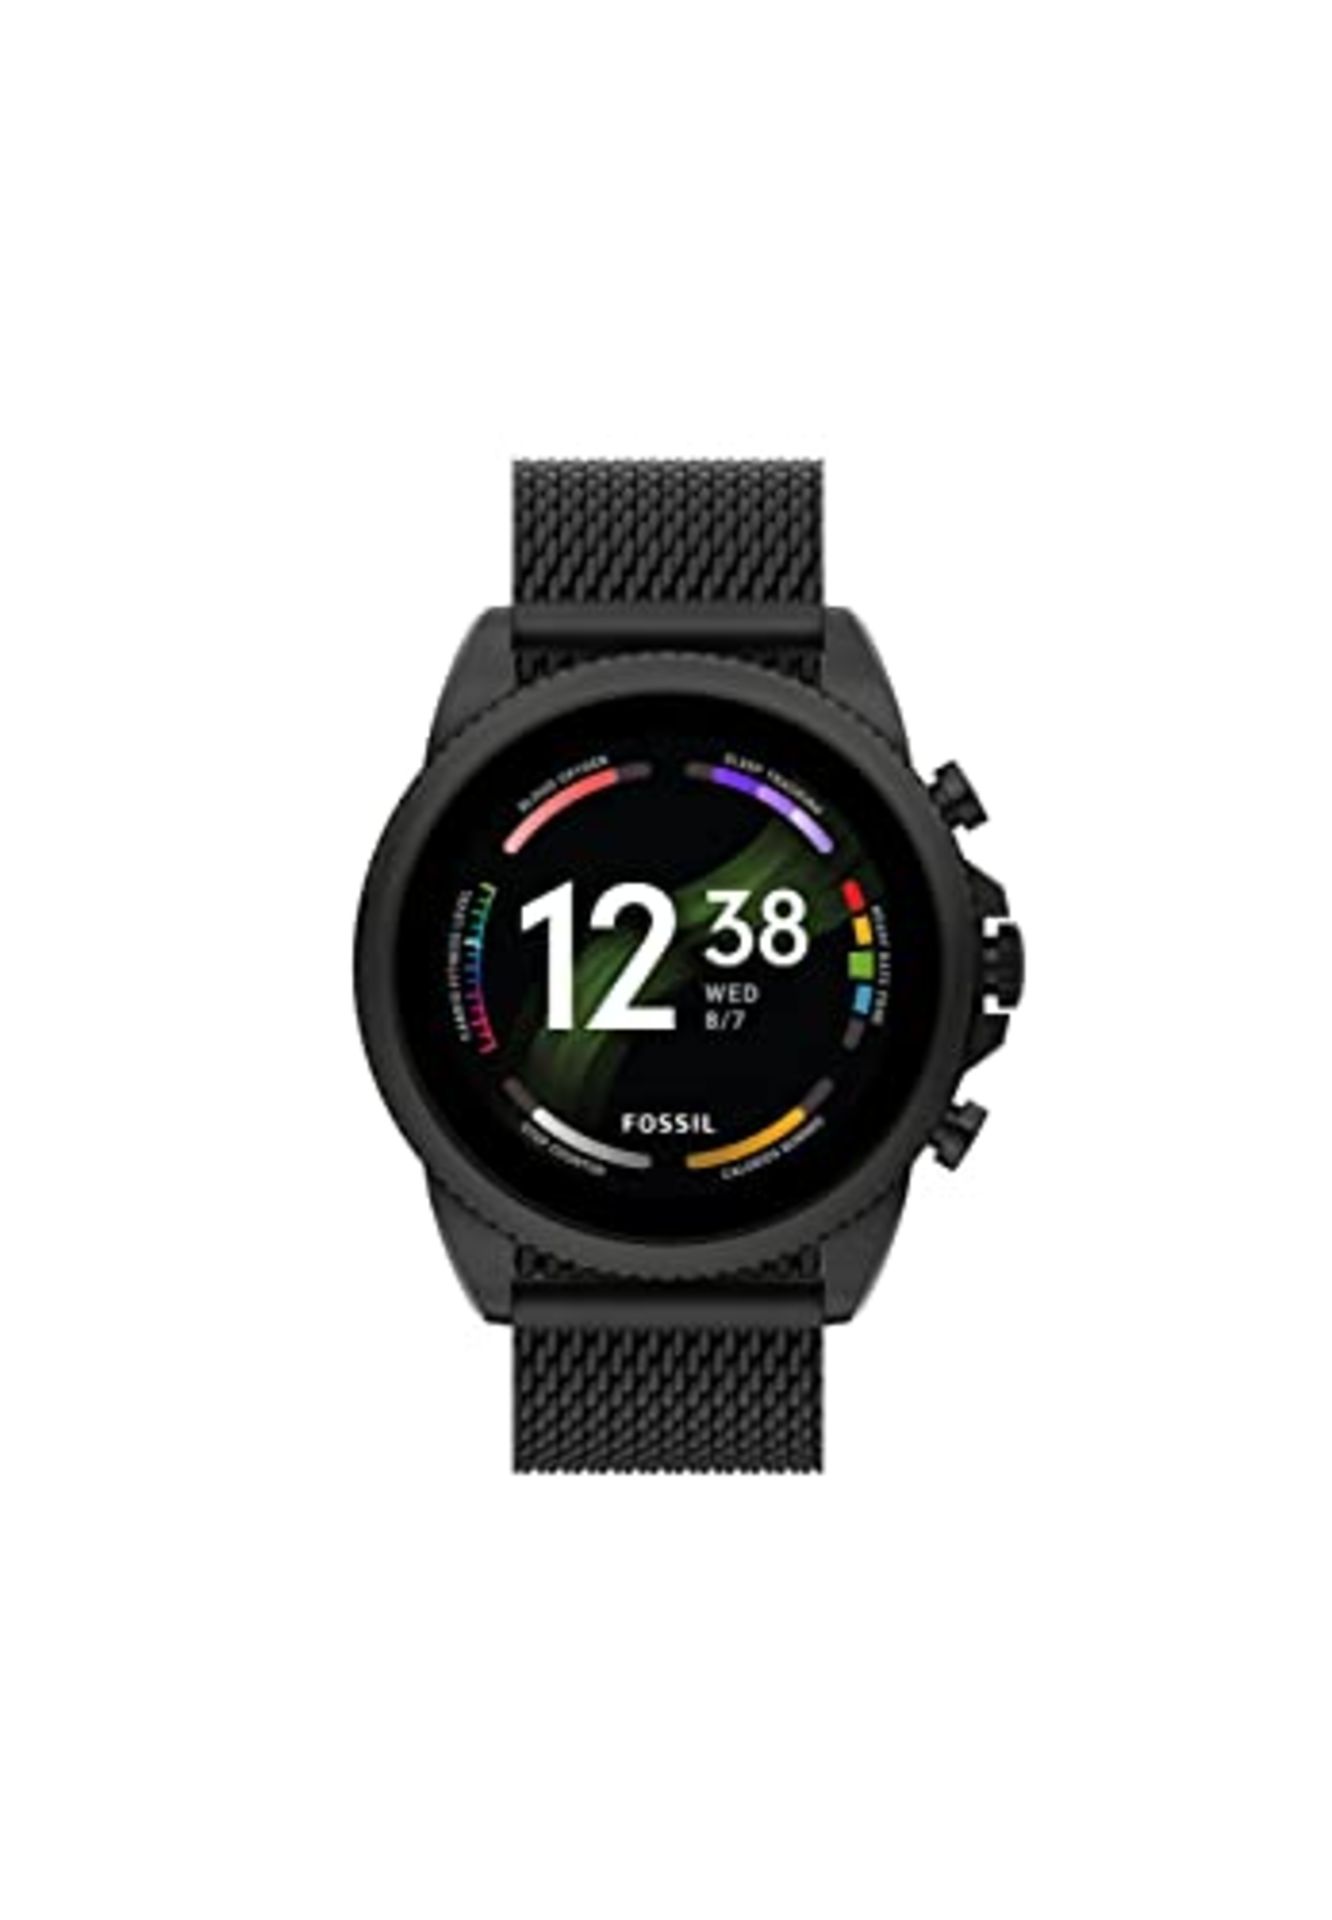 RRP £230.00 Fossil Men's Gen 6 smartwatch with speaker, heart rate, NFC, and smartphone alerts $FT - Image 4 of 6